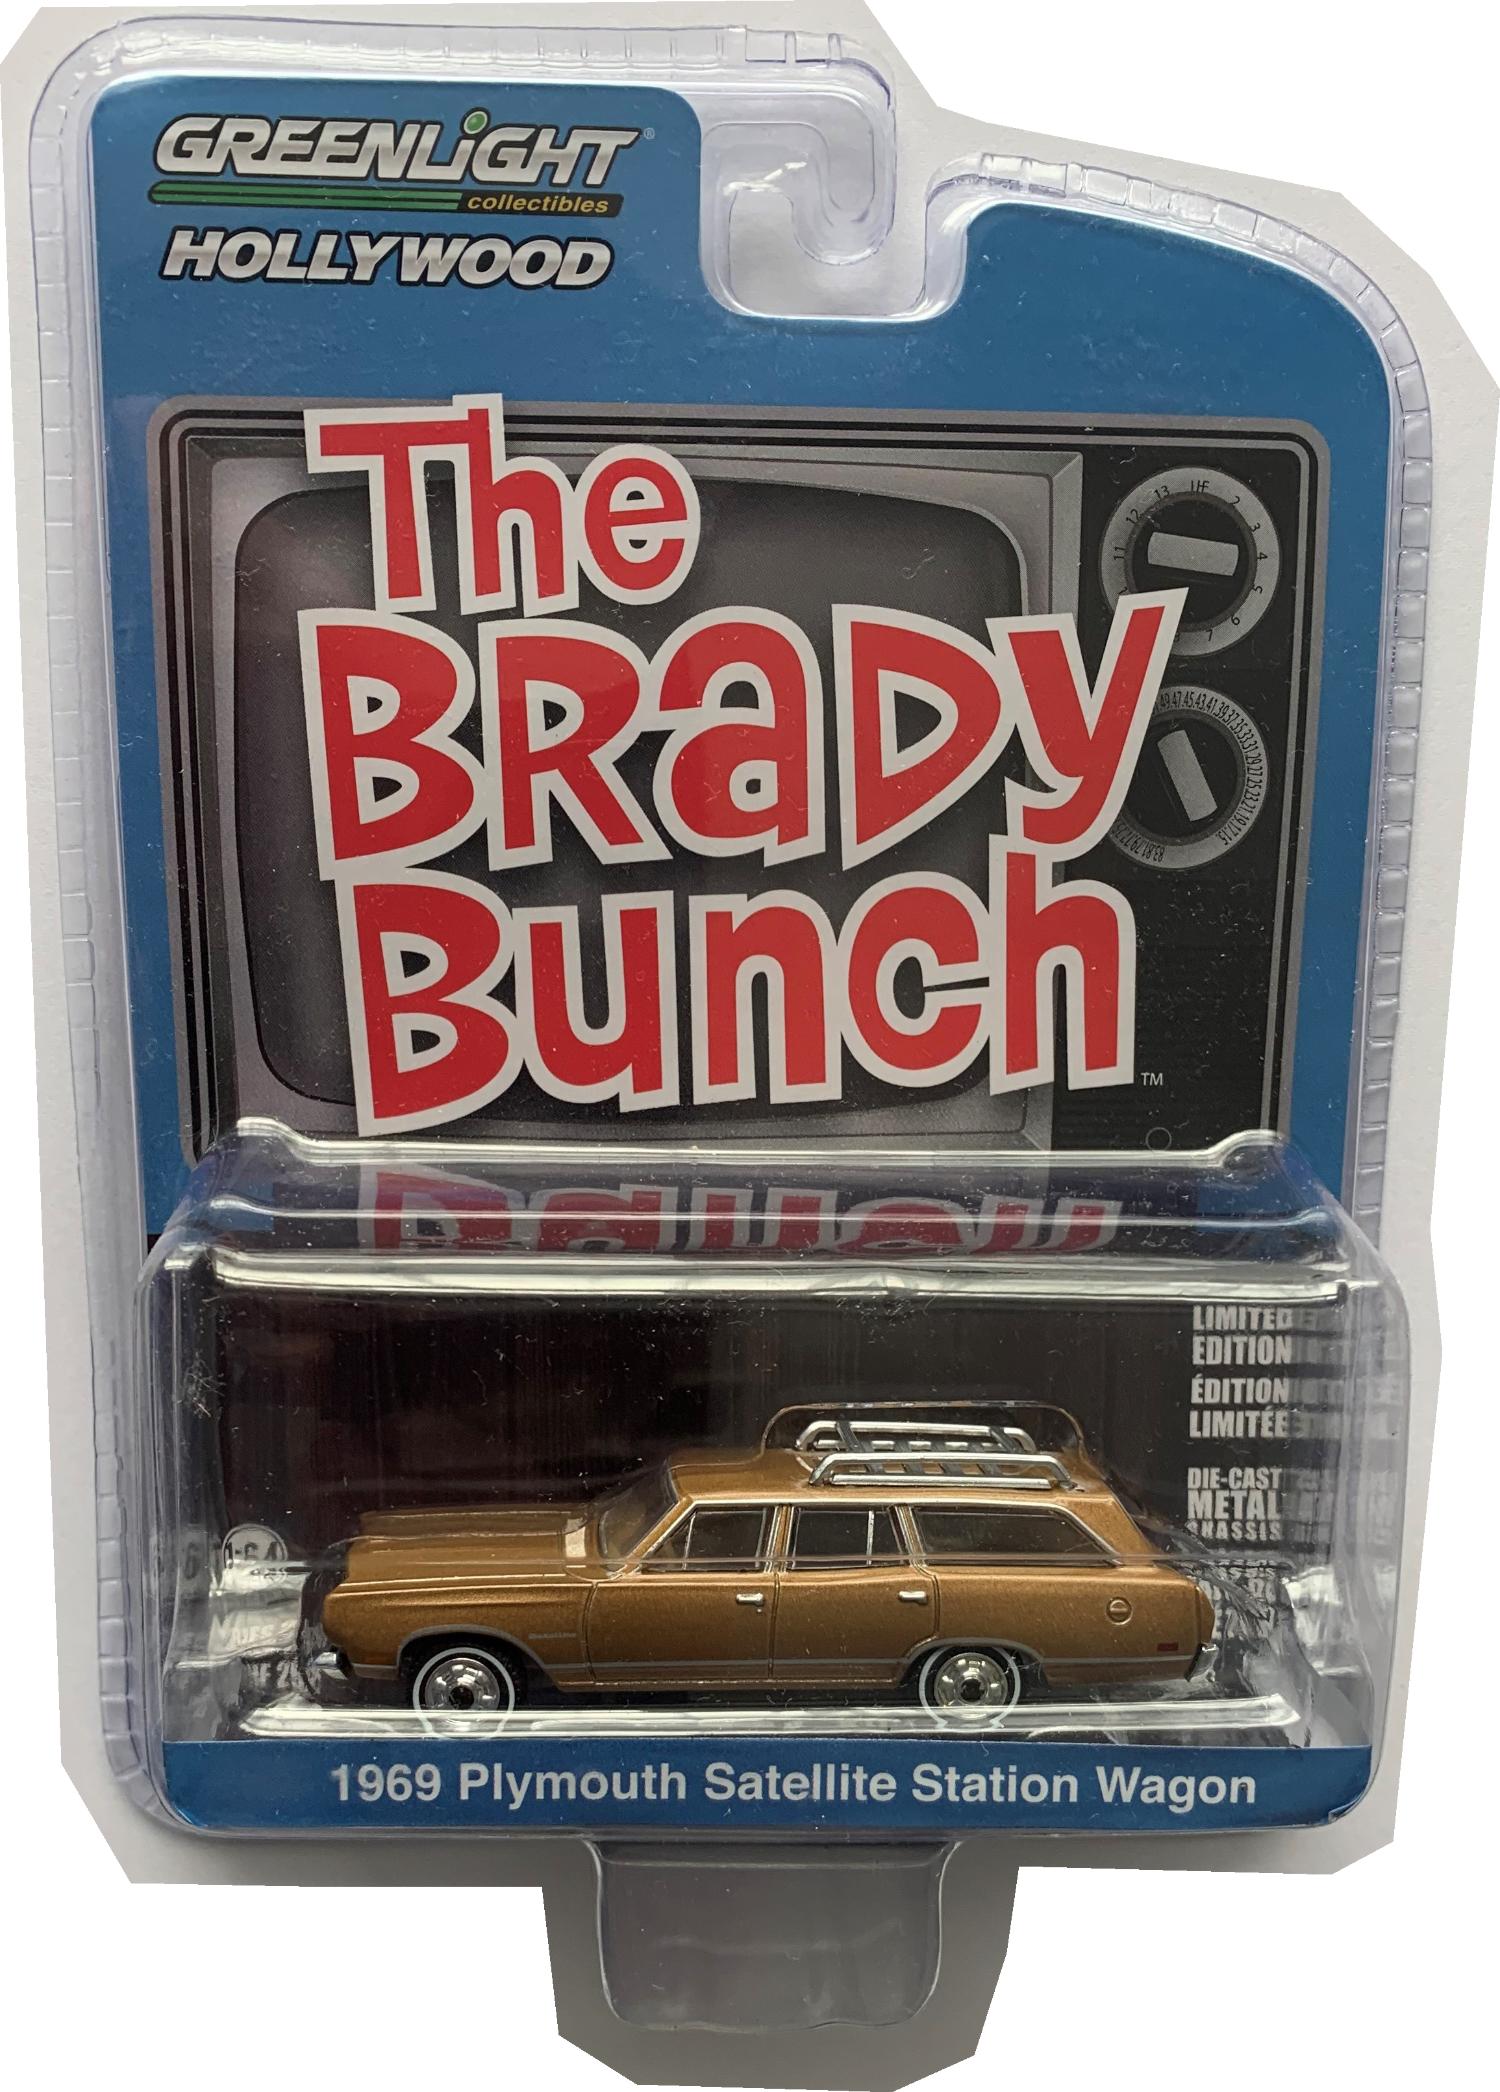 The Brady Bunch 1969 Plymouth Satellite Station Wagon 1:64 scale model from Greenlight Hollywood, series 29, limited edition model